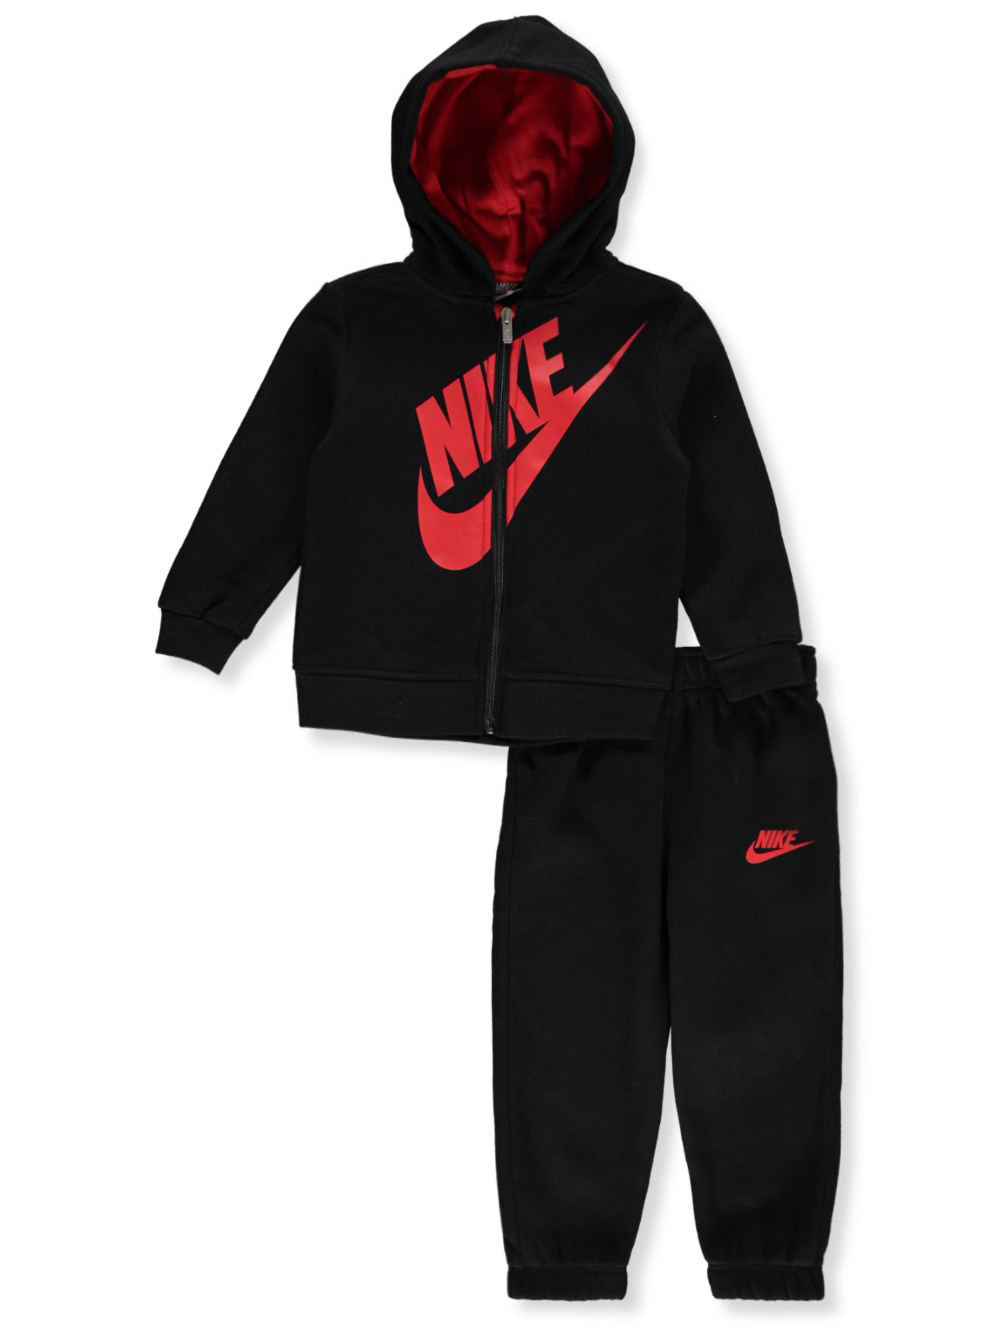 nike sweatsuit red and black